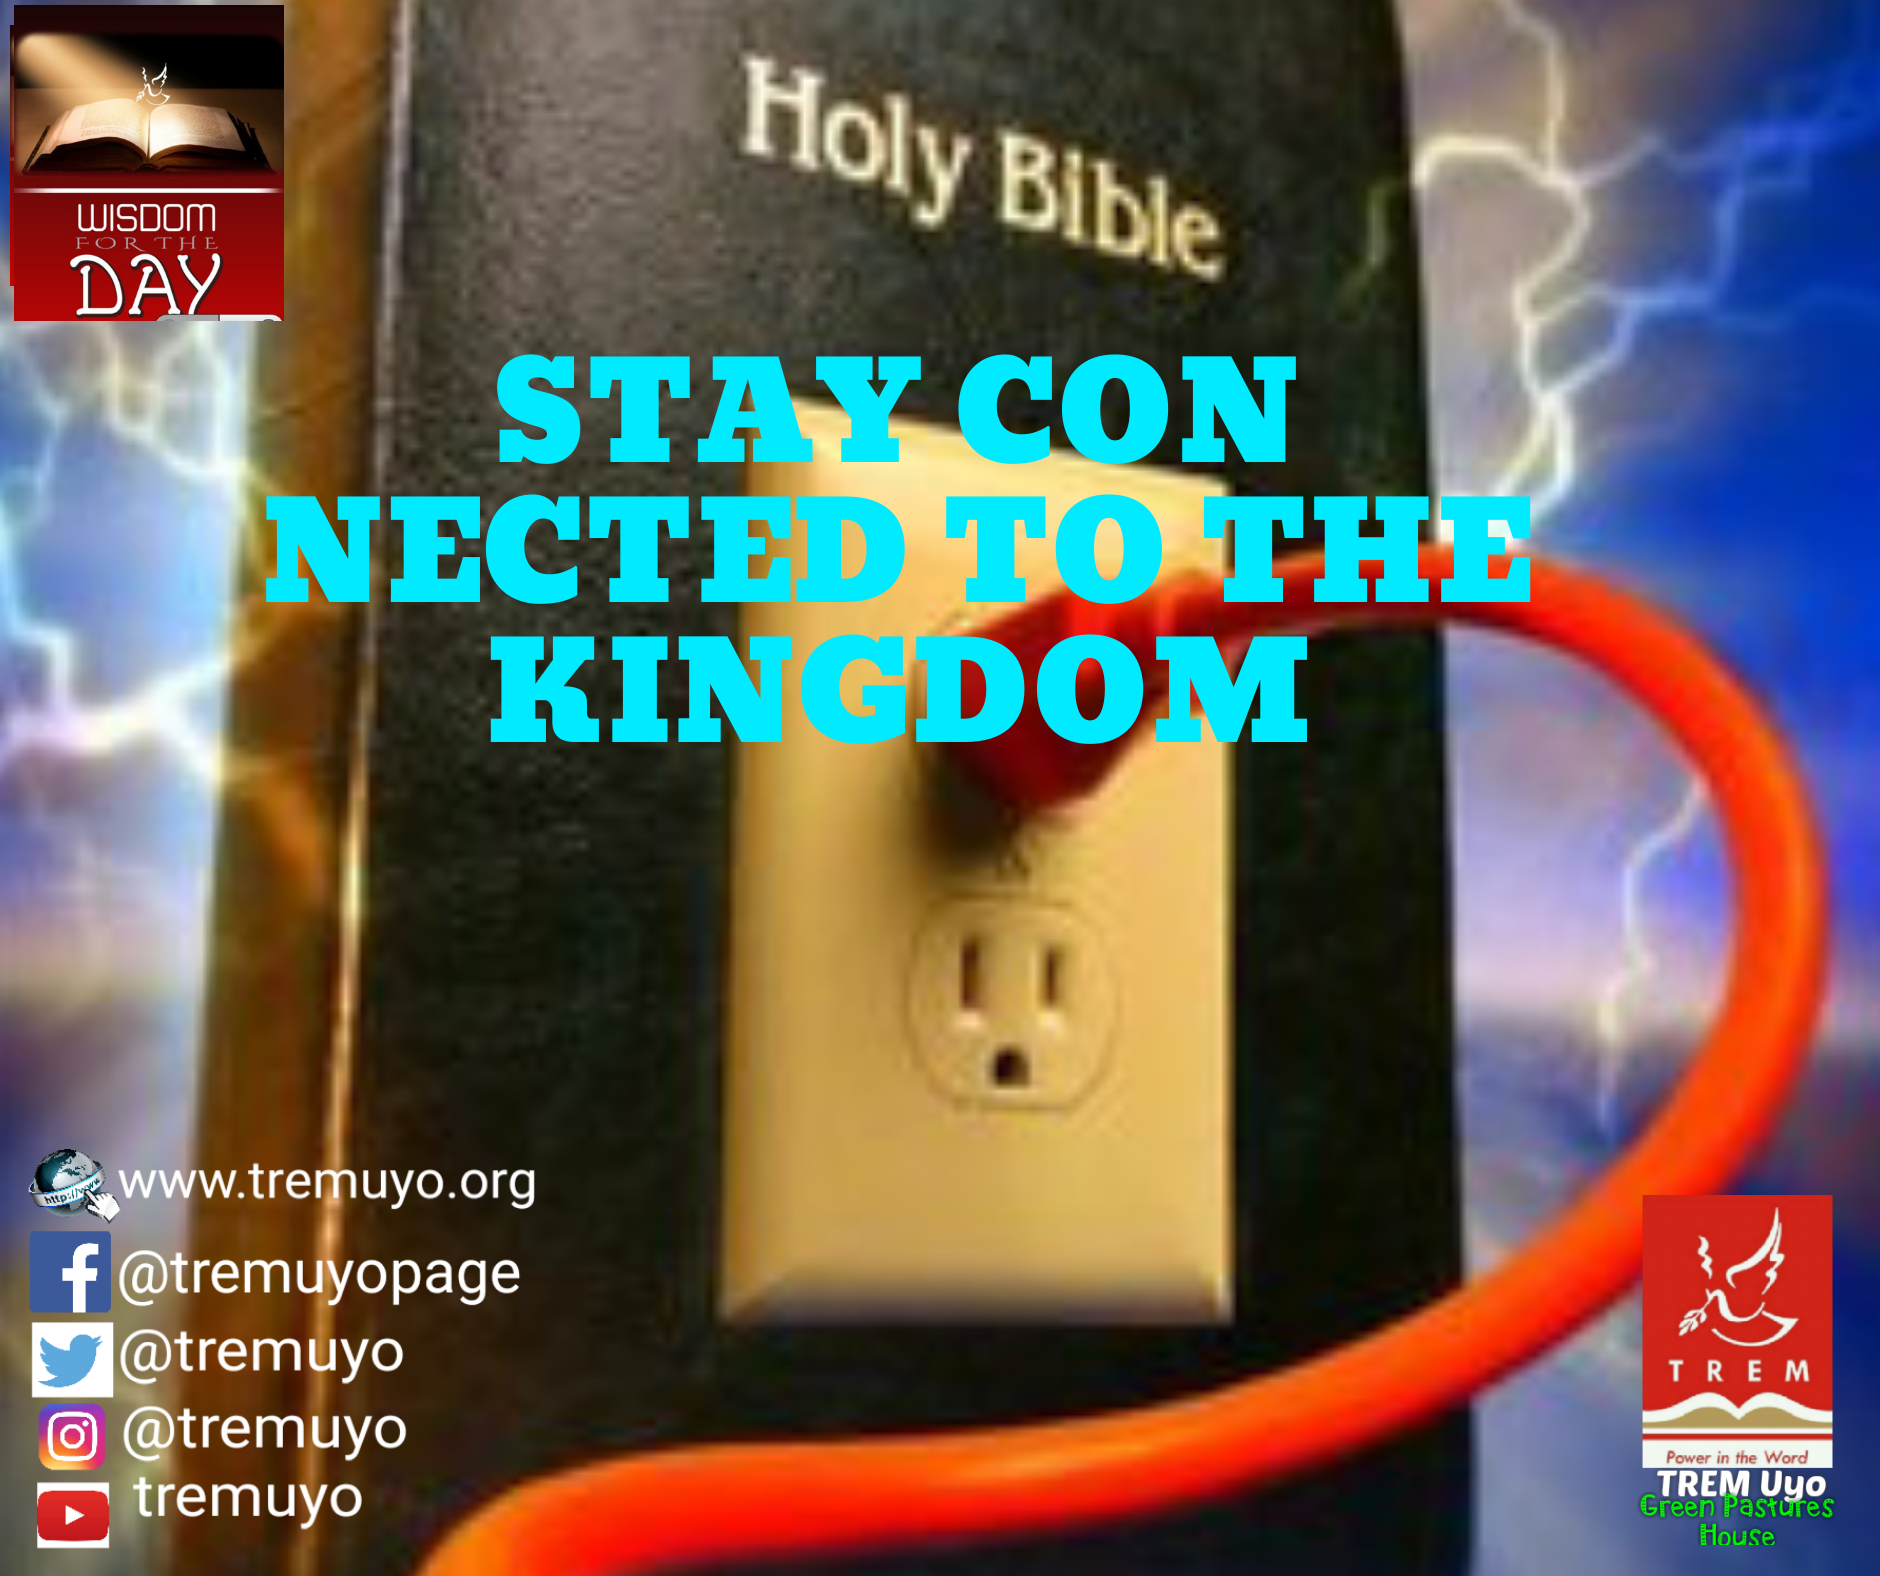 STAY CONNECTED TO THE KINGDOM